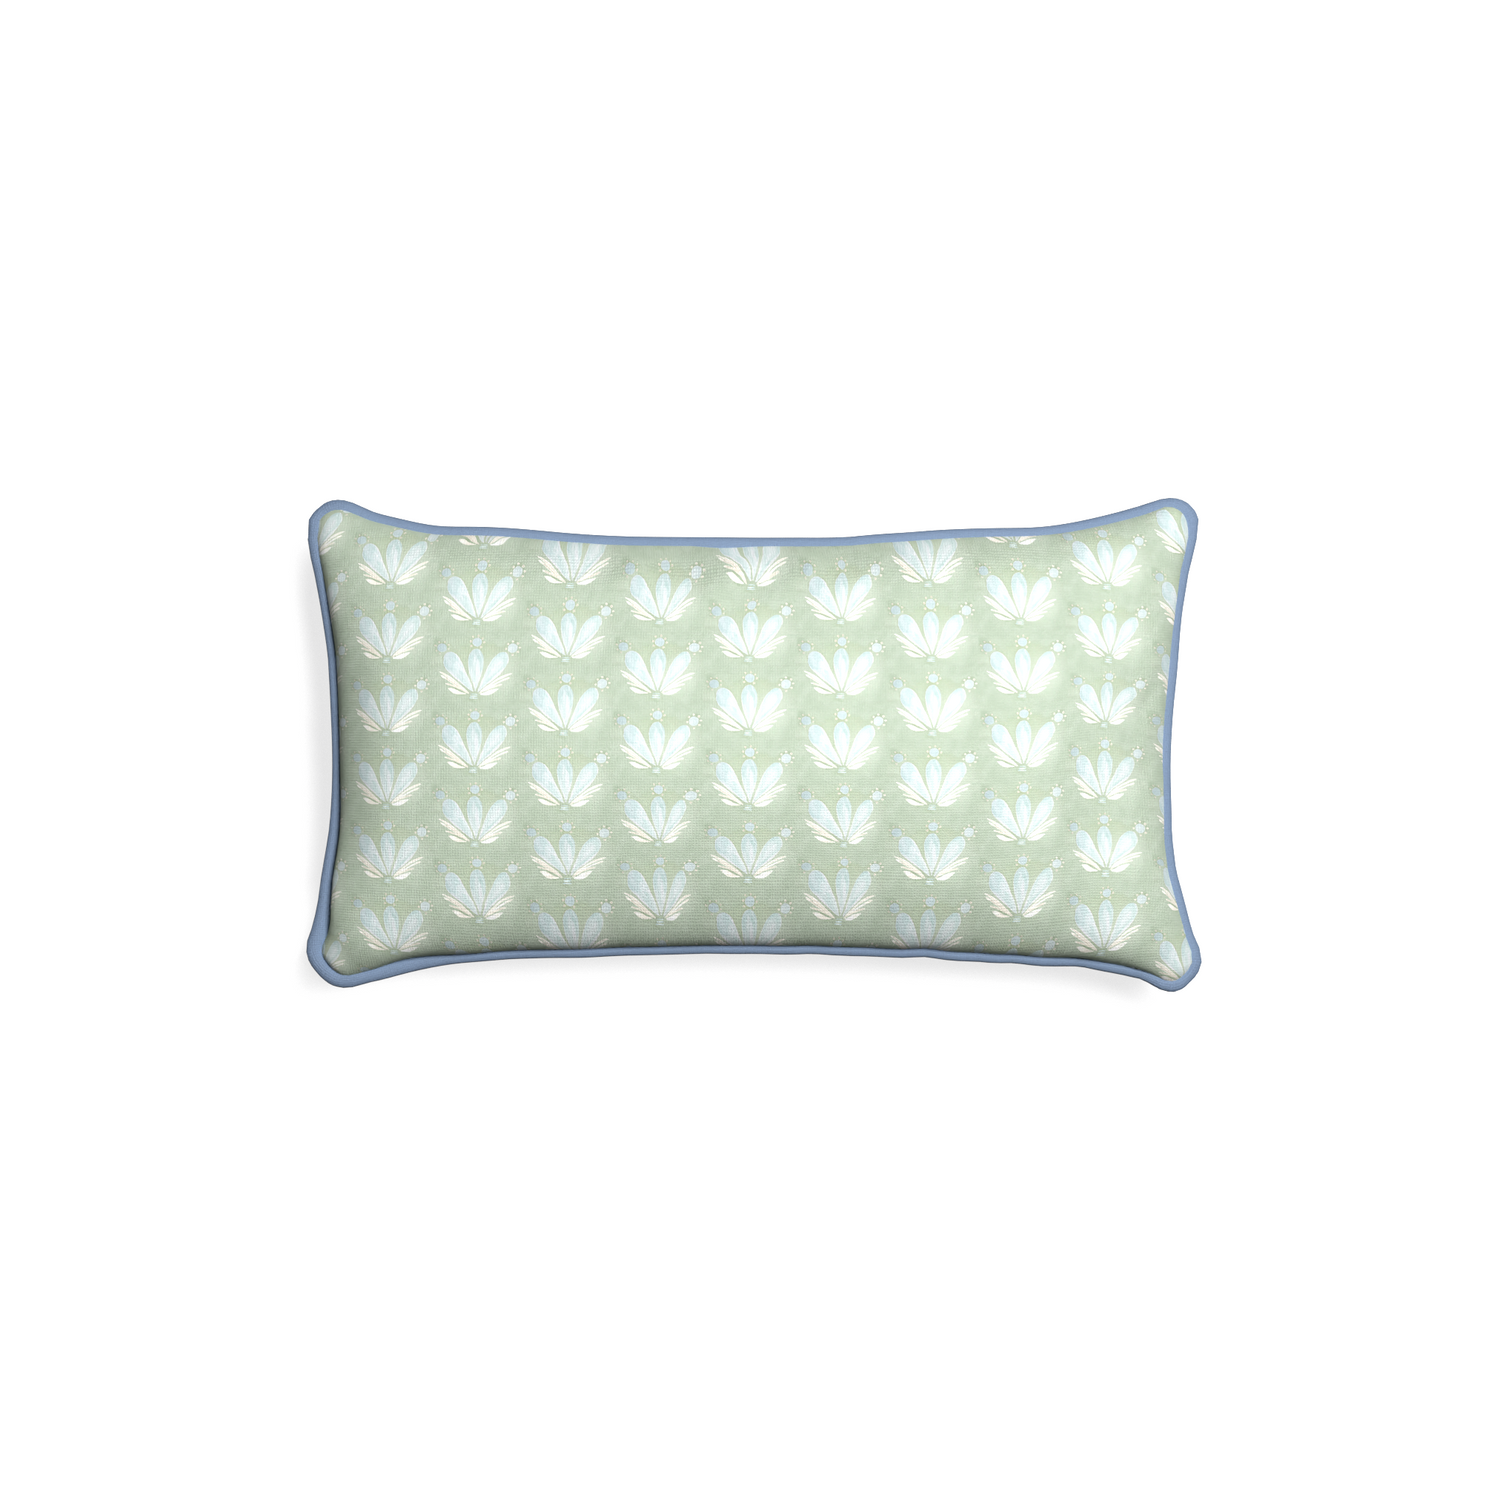 Petite-lumbar serena sea salt custom blue & green floral drop repeatpillow with sky piping on white background